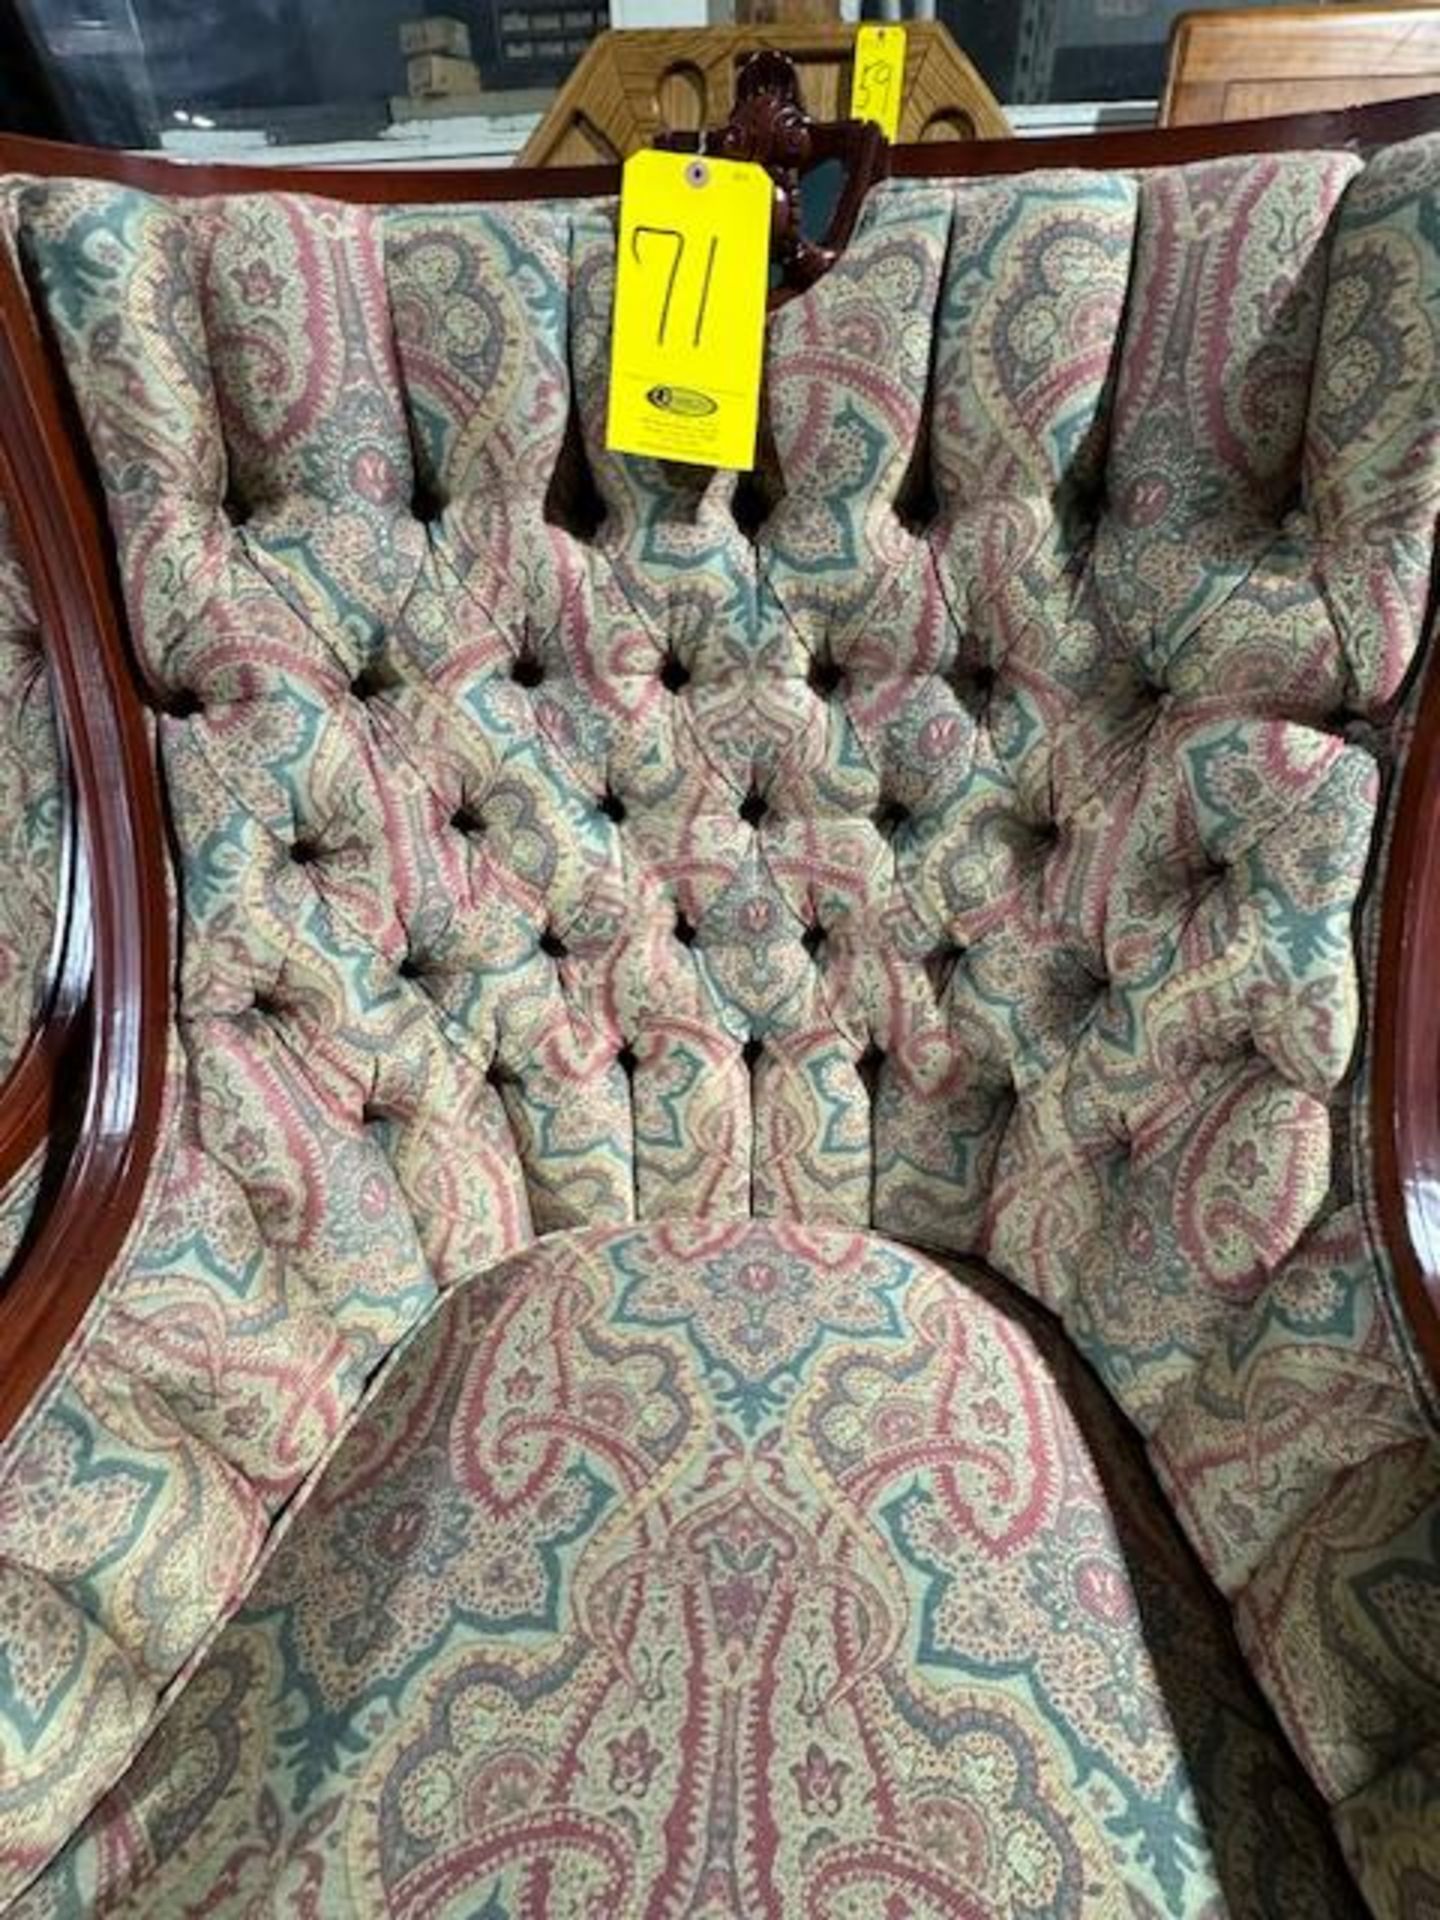 (2) ANTIQUE MAHOGANY AND NEWLY RE-UPHOLSTERED TUFTED HIGH-BACK CHAIRS (MINIMAL... - Image 2 of 4